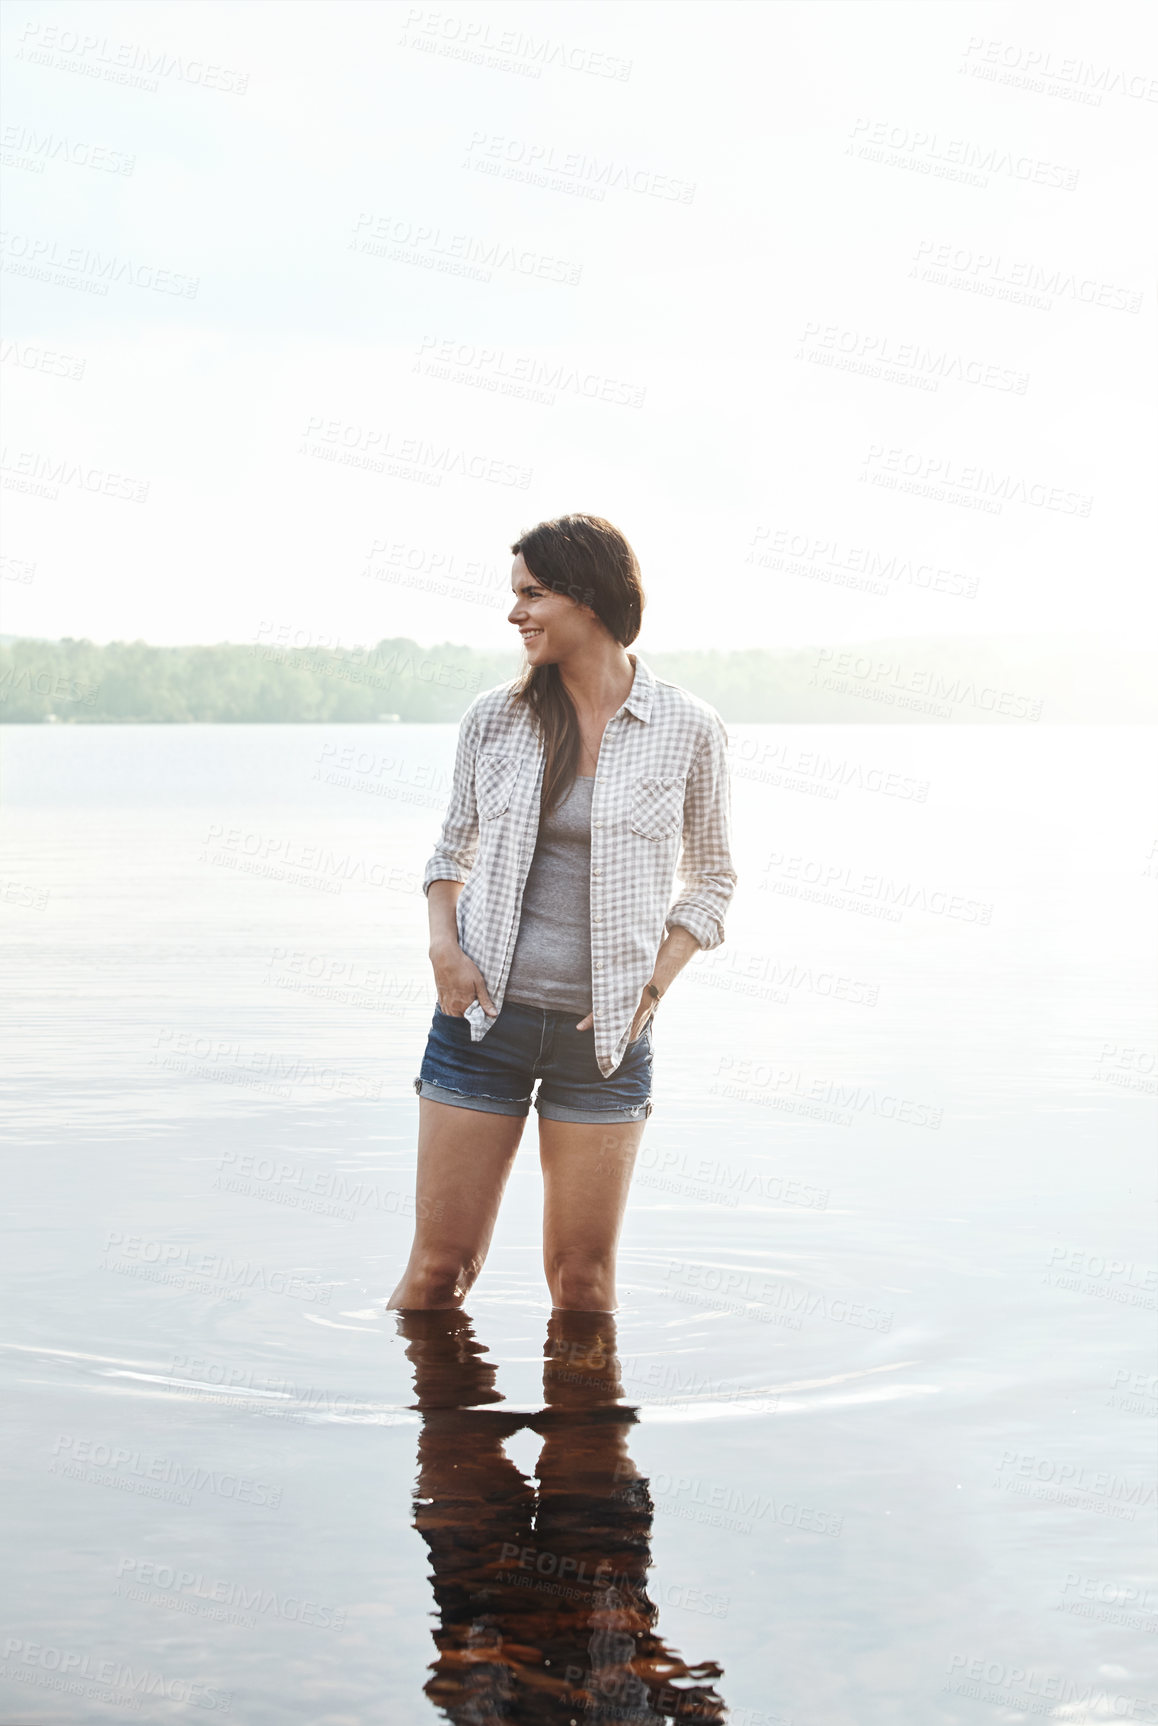 Buy stock photo Shot of an attractive young woman standing in a lake